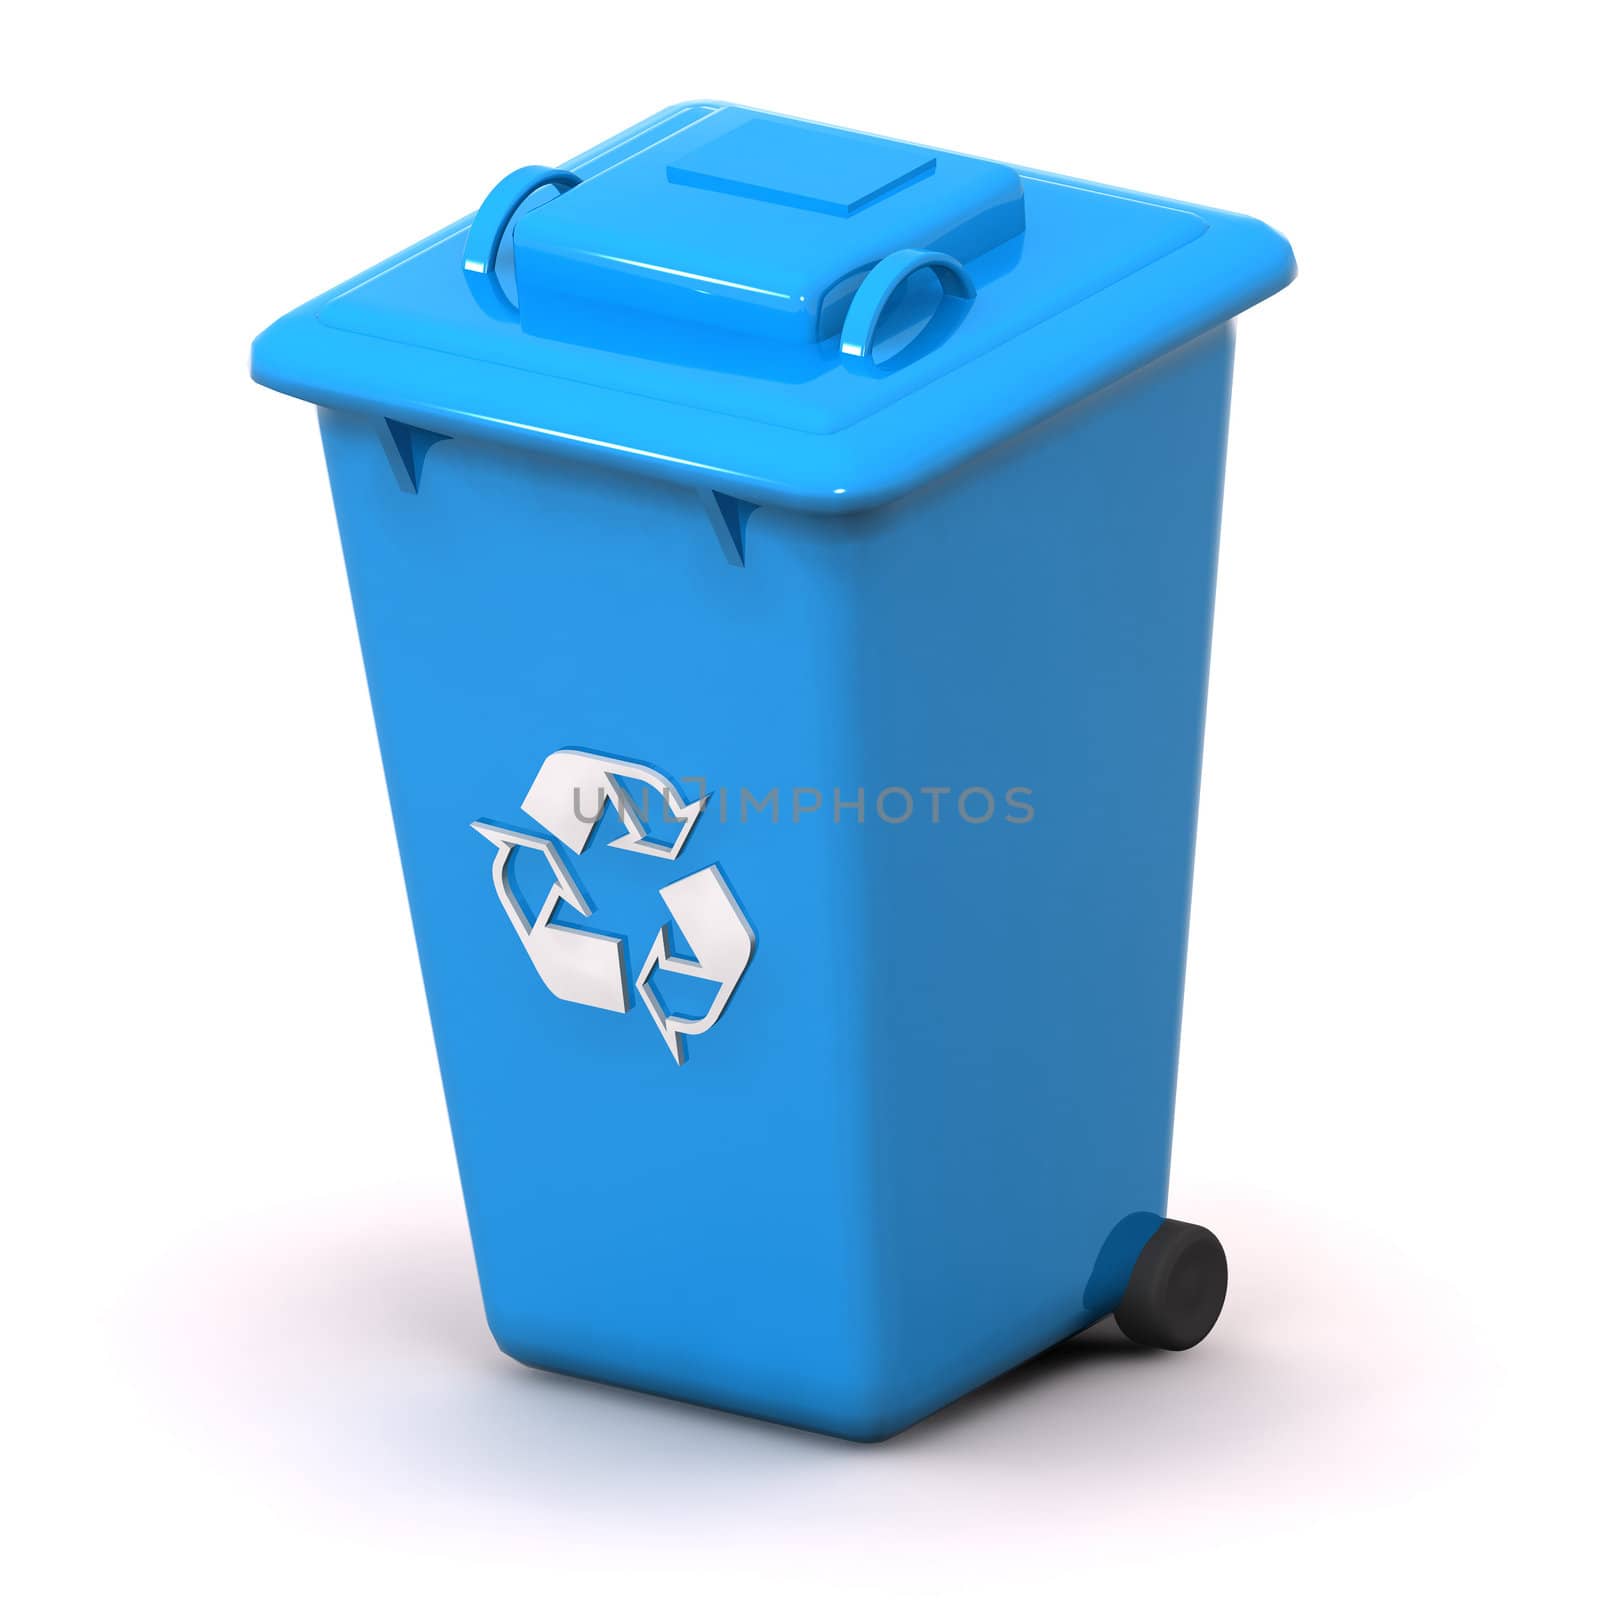 A Colourful 3d Rendered Blue Recycle Bin Concept Illustration